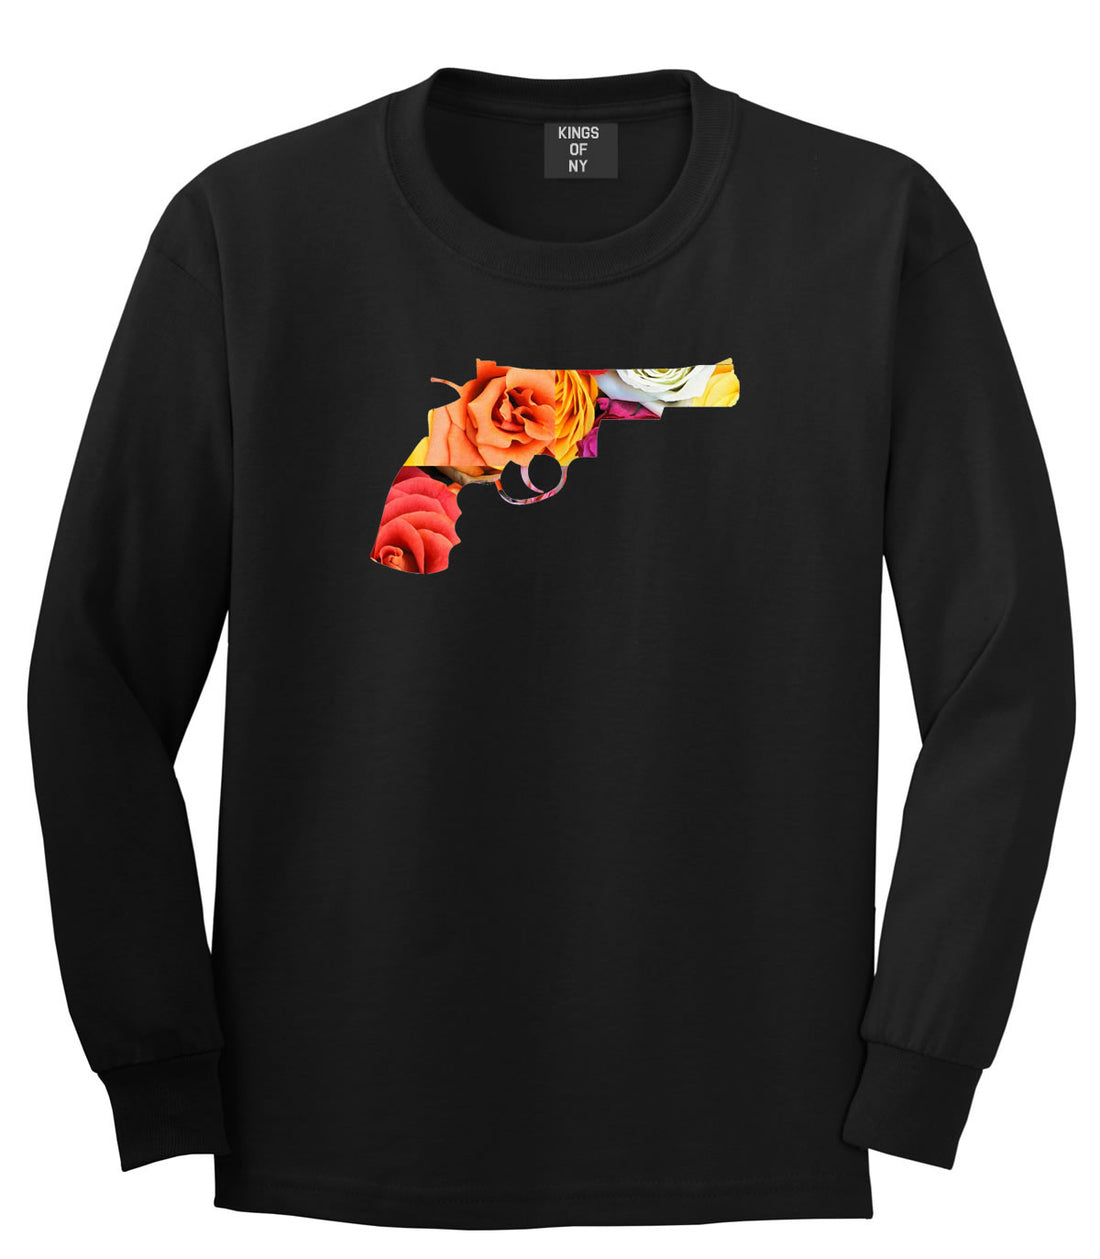 Floral Gun Flower Print Colt 45 Revolver Long Sleeve T-Shirt In Black by Kings Of NY